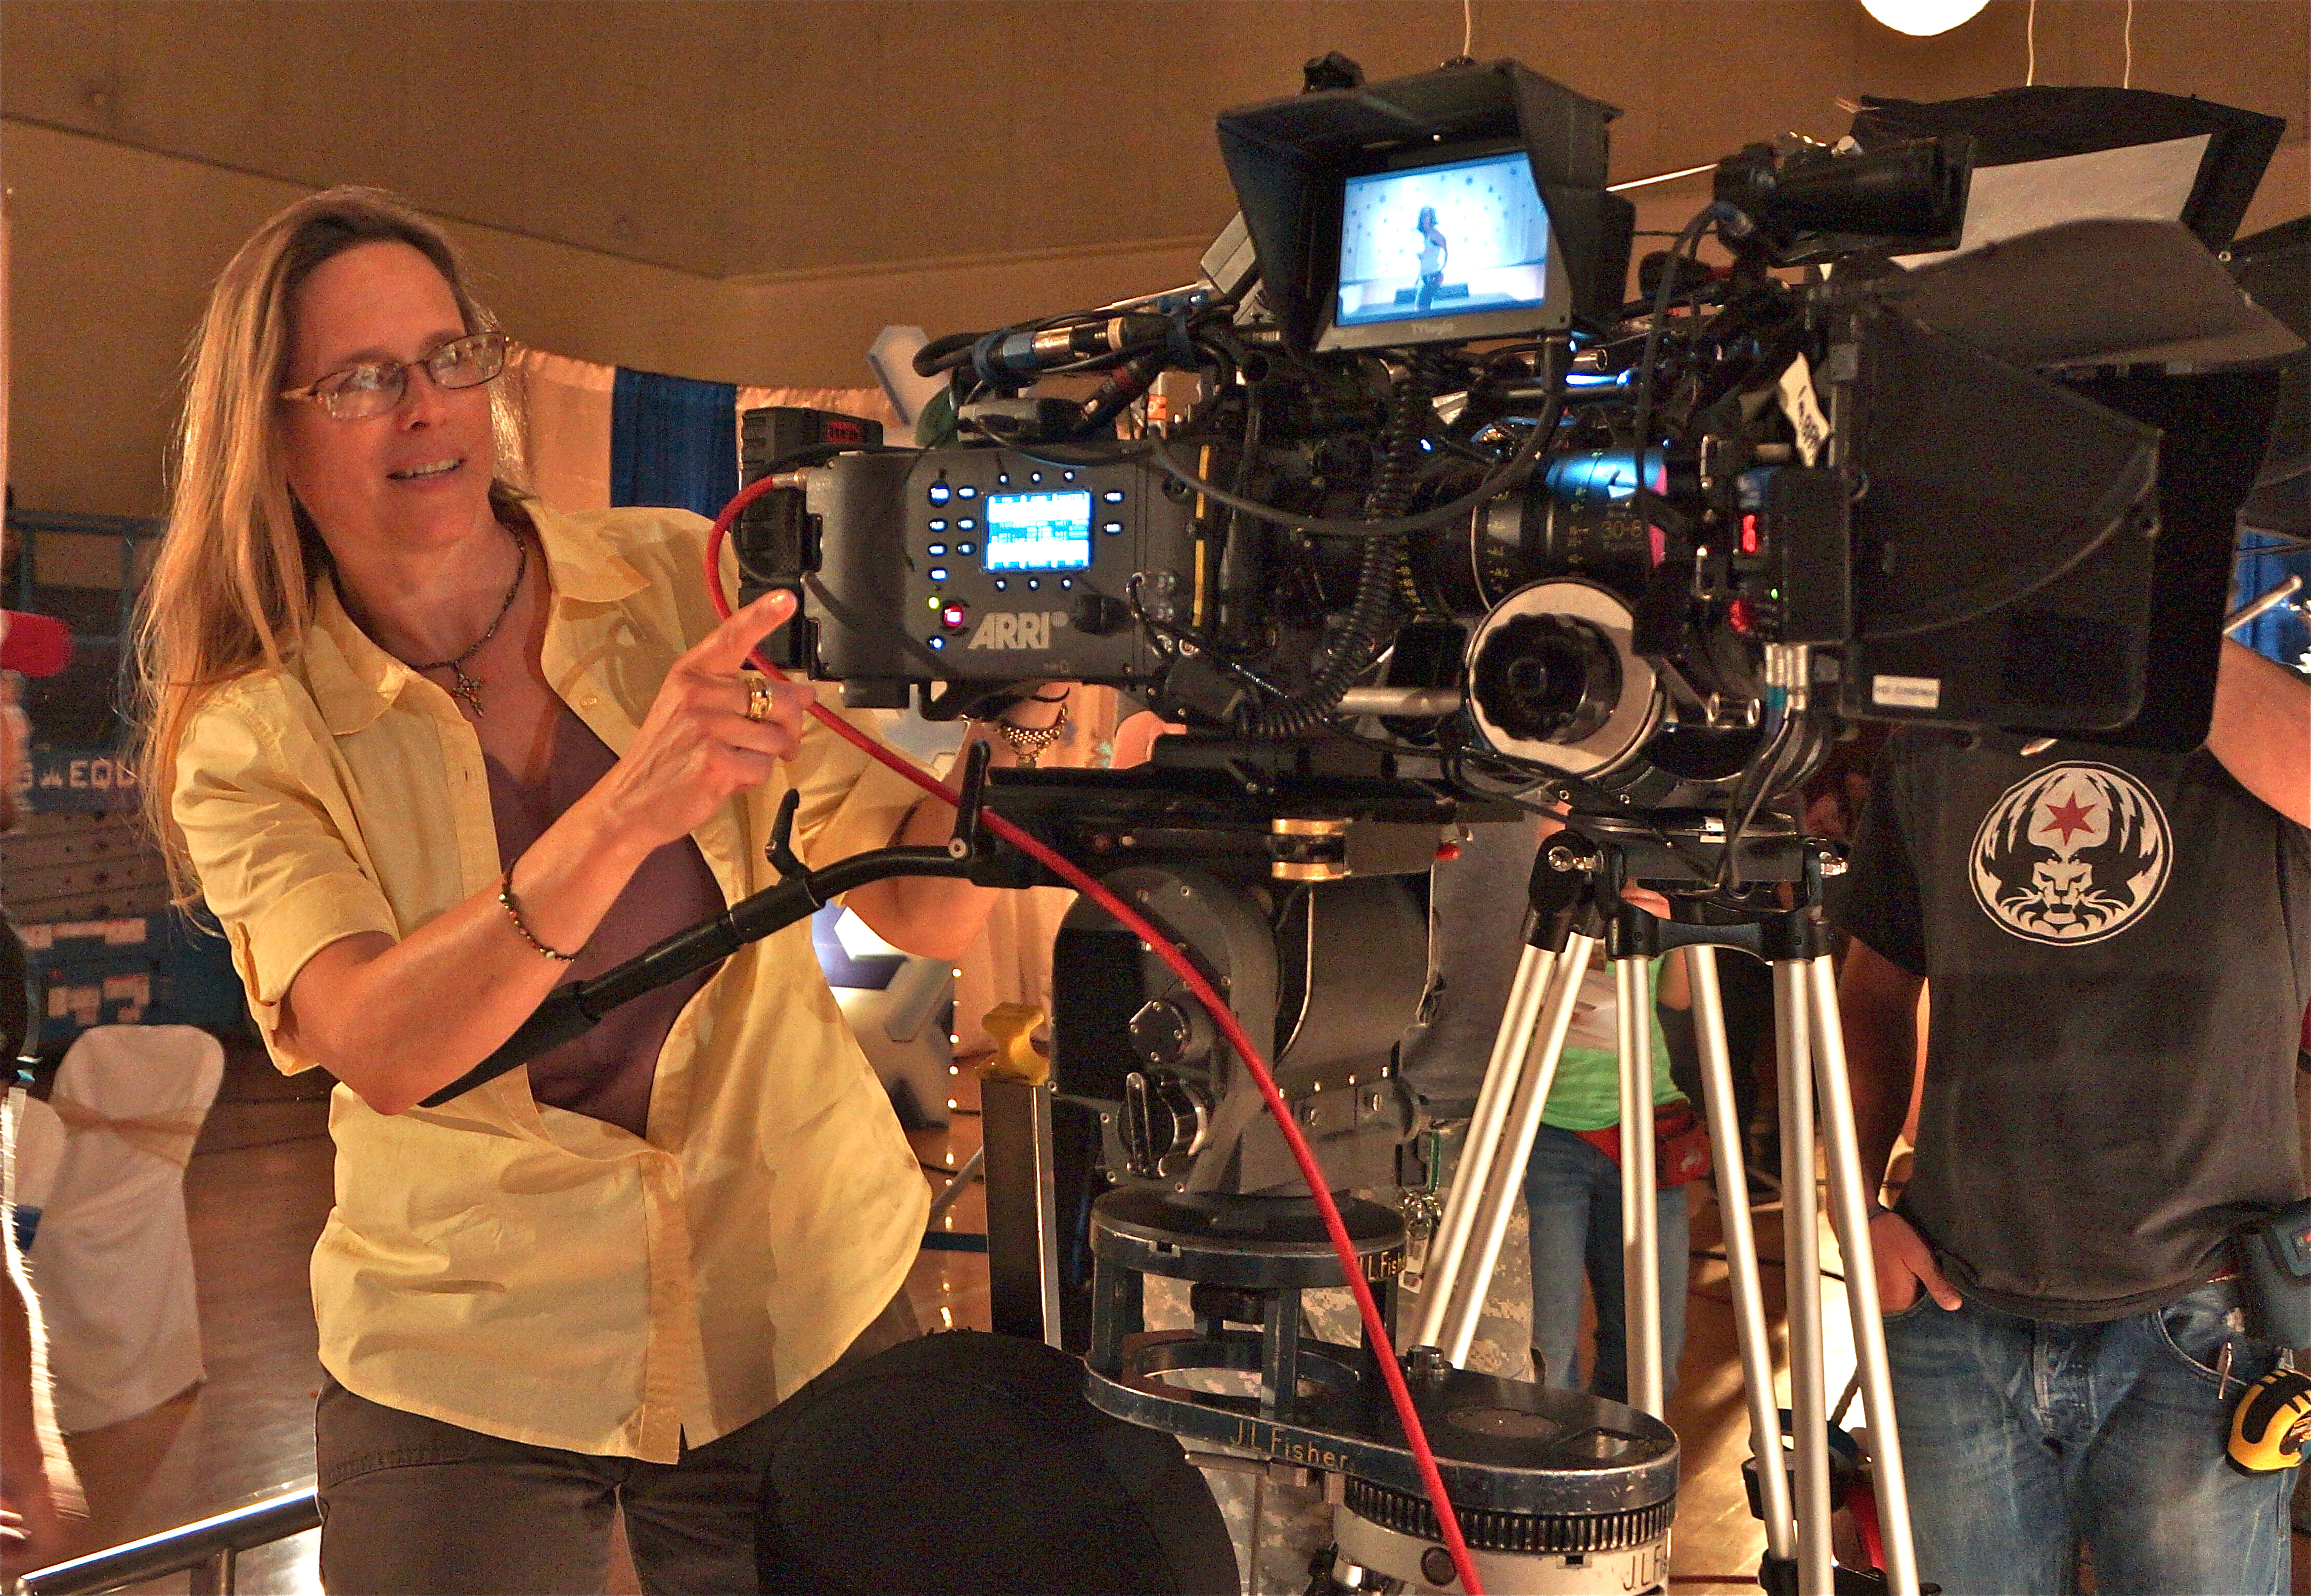 Directing 'A Christmas Tale'